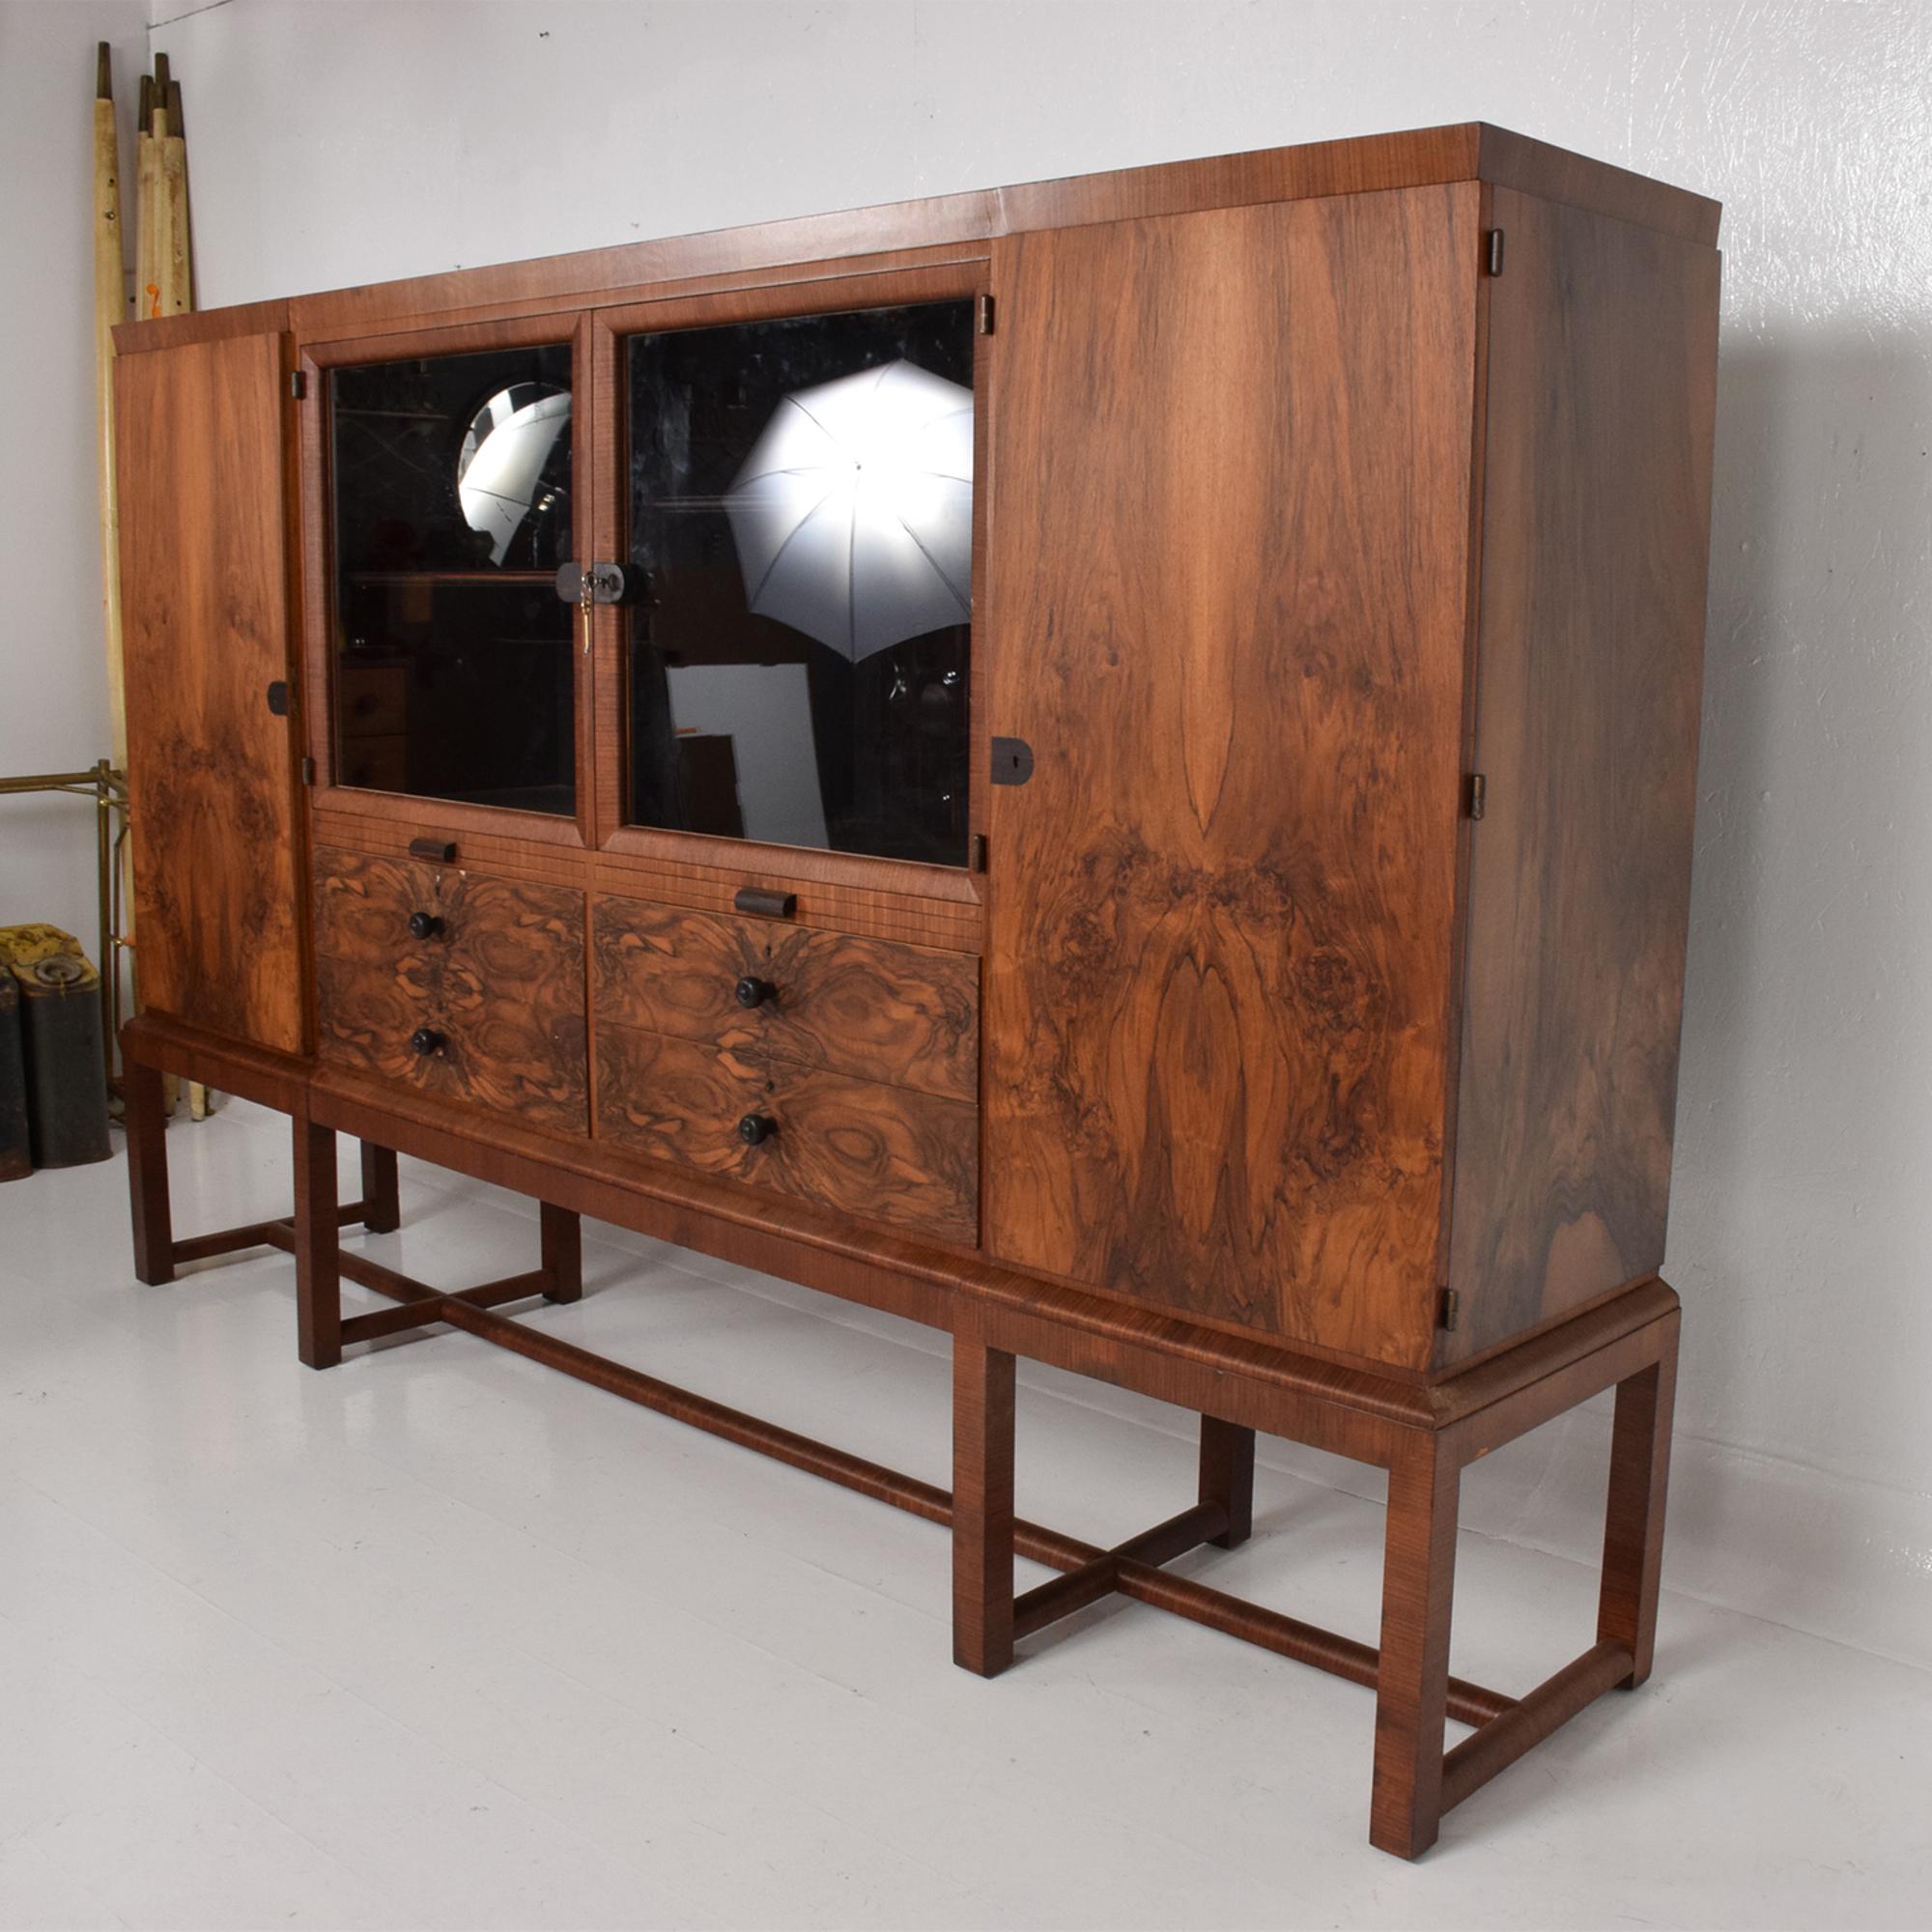 Art Deco cabinet designed by Bruno Paul for Deutsche Werkstätten Hellerau GmbH Germany 1930s. Iconic piece from the Bauhaus period.
Beautiful craftsmanship utilizing exotic woods; features four sections with storage, adjustable shelves, pull-out